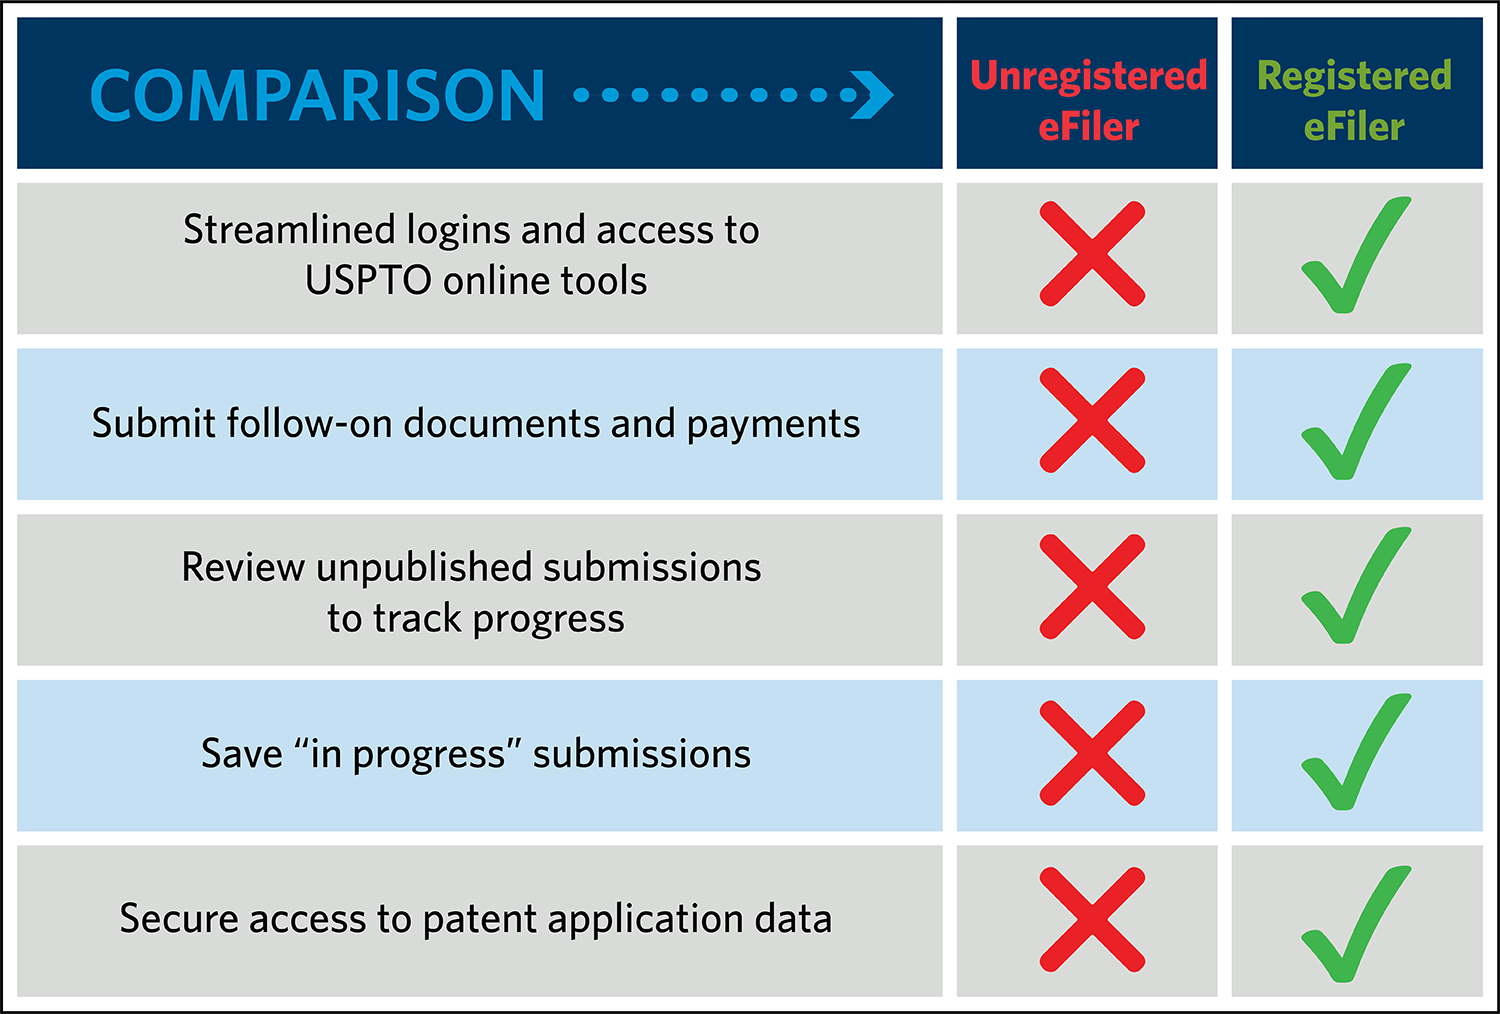 Green checks show registered eFilers have single login, online tool access, follow-on document, payment submission, unpublished submission tracking, in progress submission saving and secure application access. Red X shows no options if unregistered.